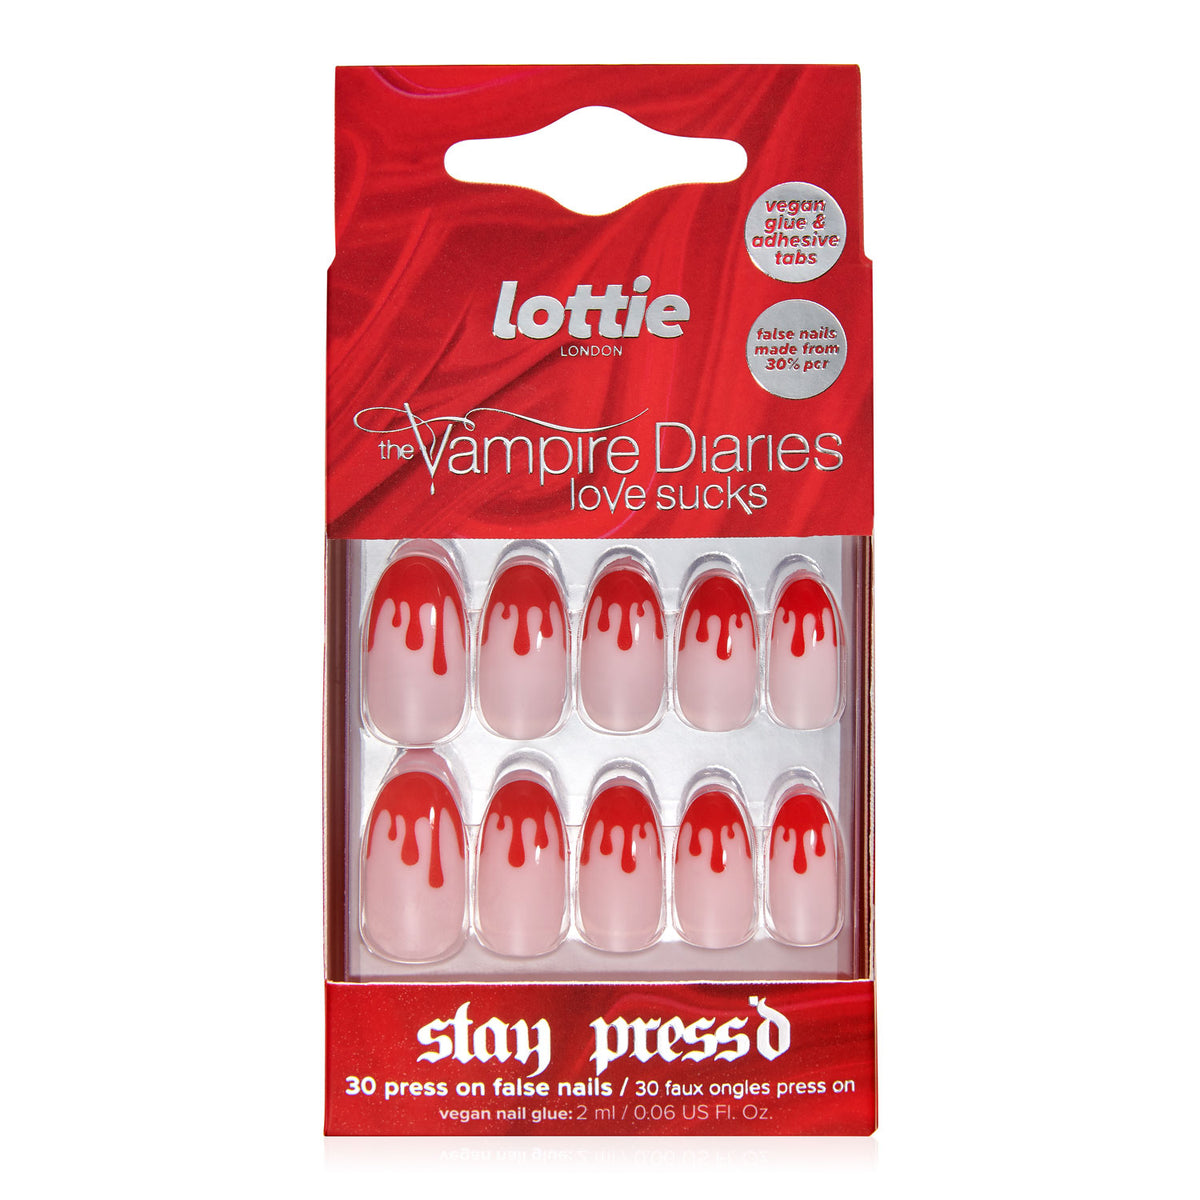 Lottie London x Vampire Diaries Adhesive Face & Body Gems, Bloodline Red, Size: 1